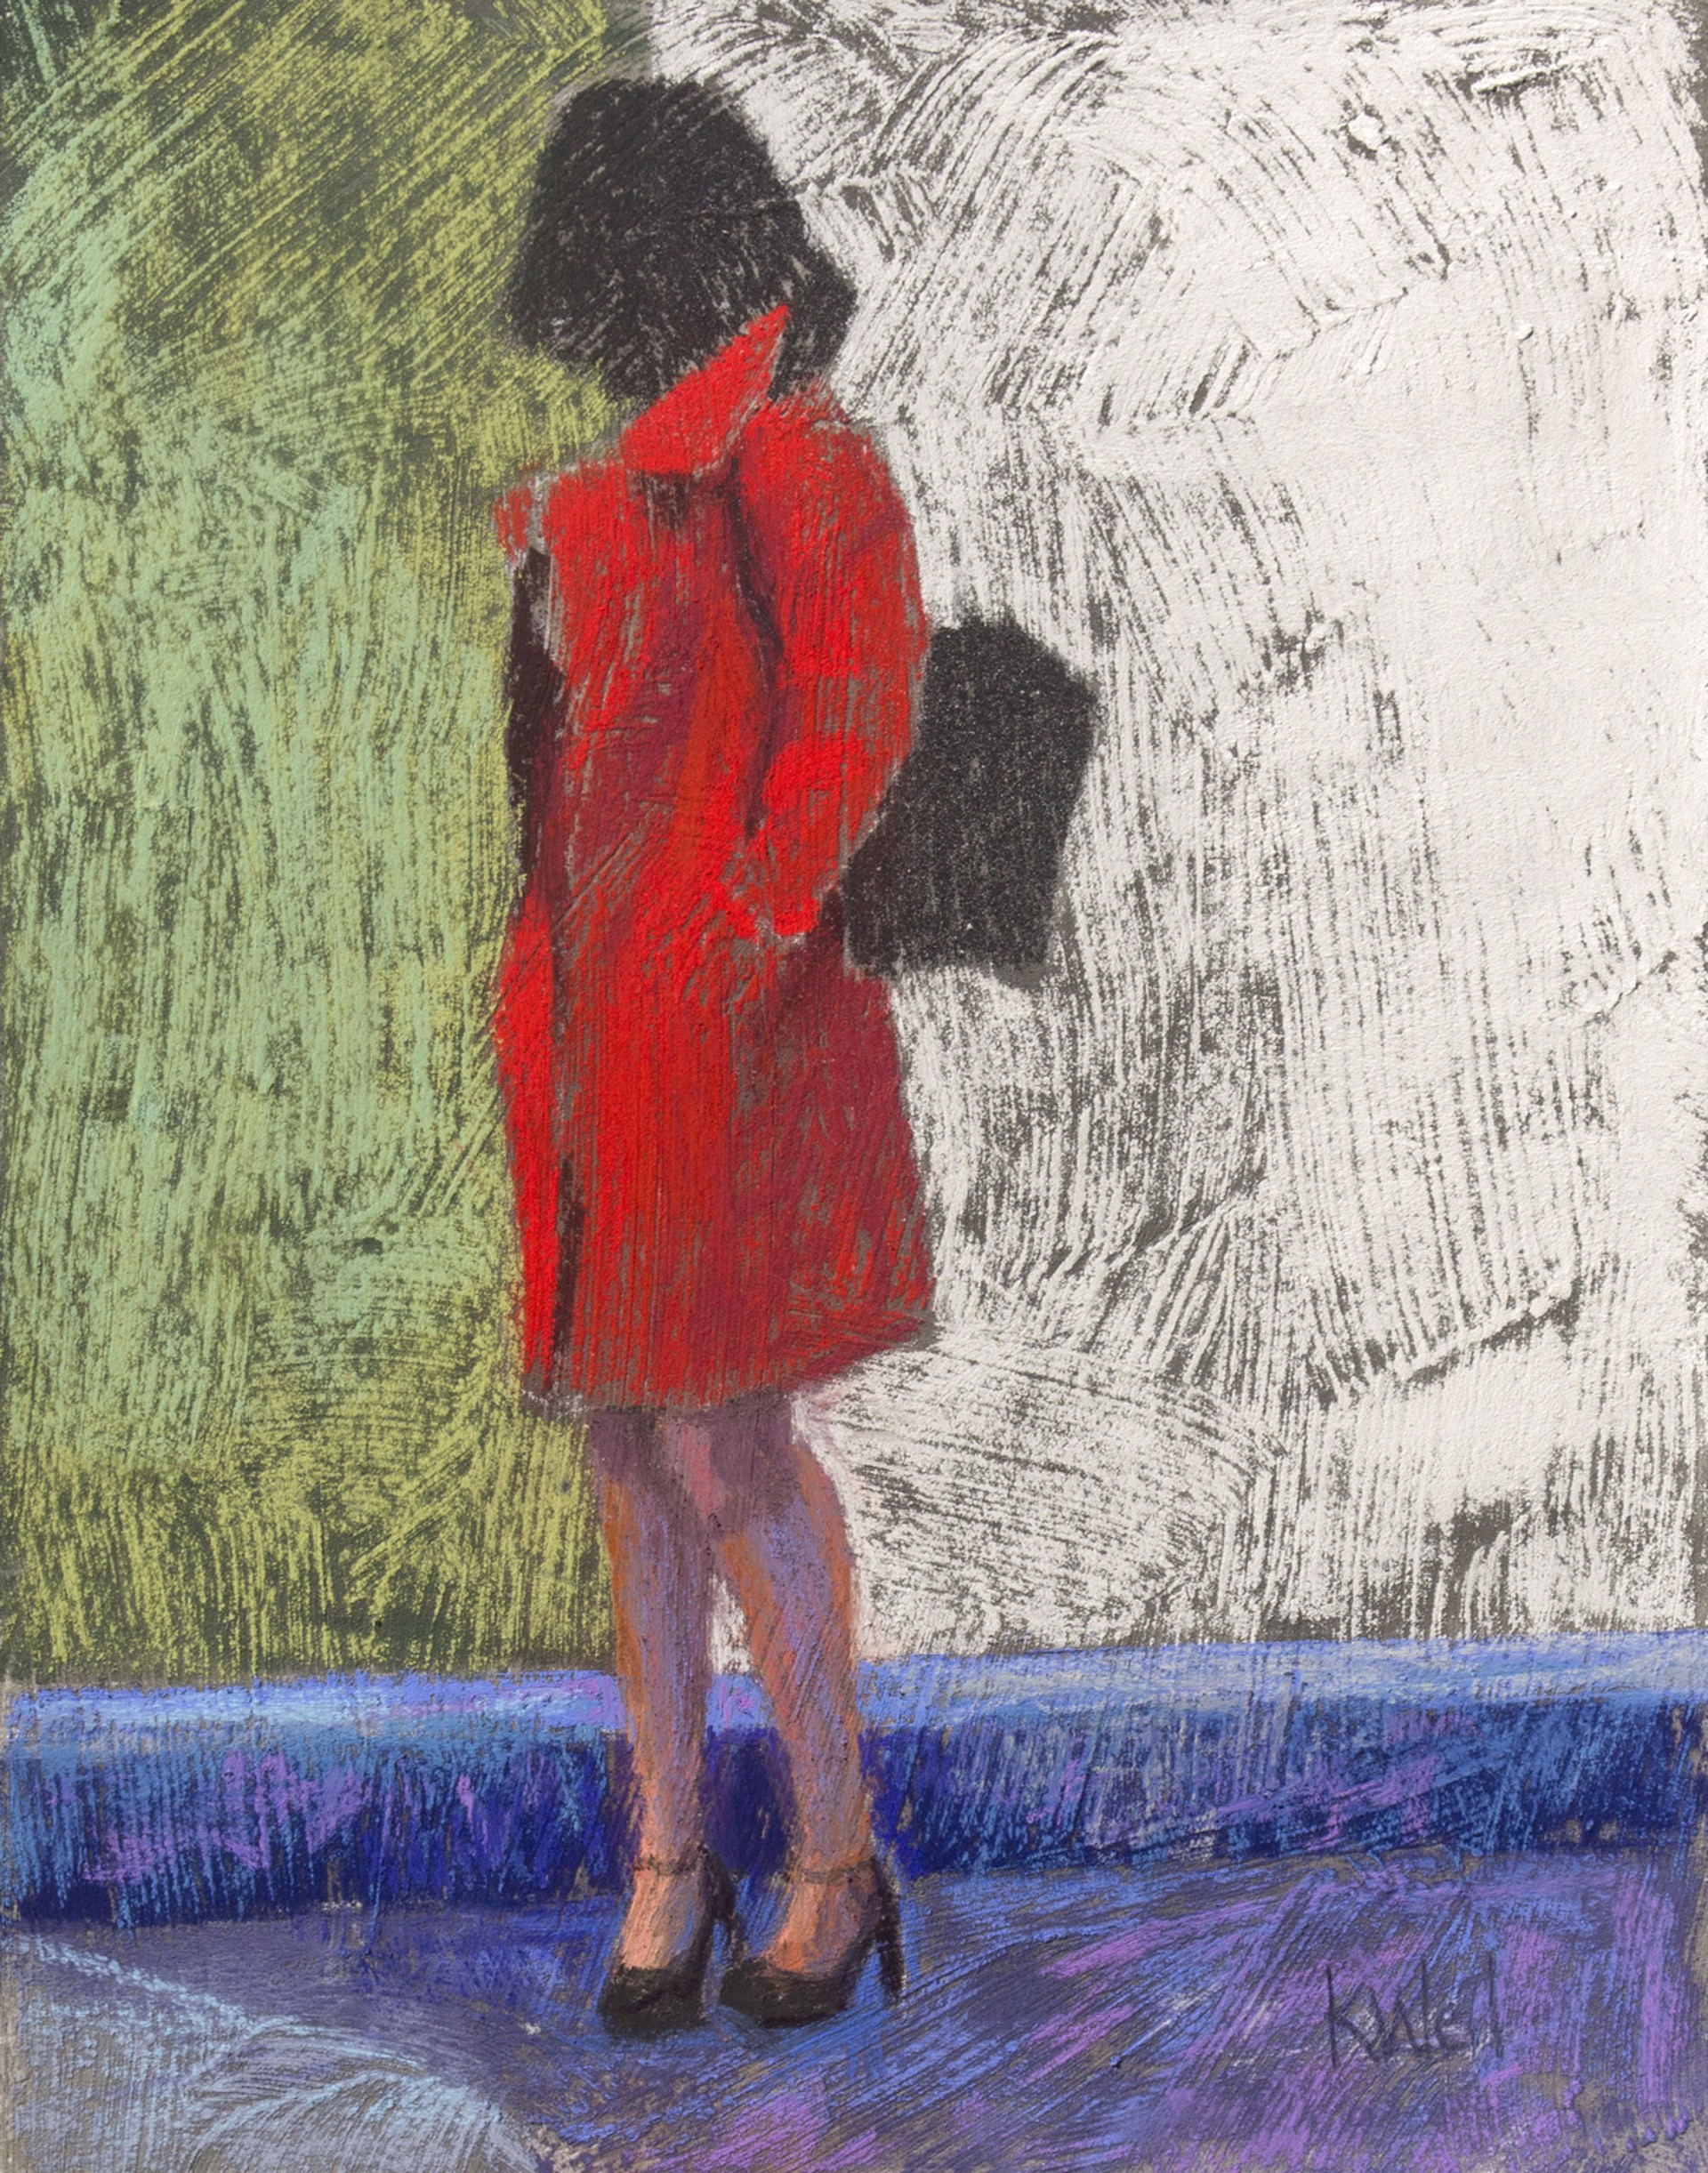 Waiting in Red by Kathleen Weil